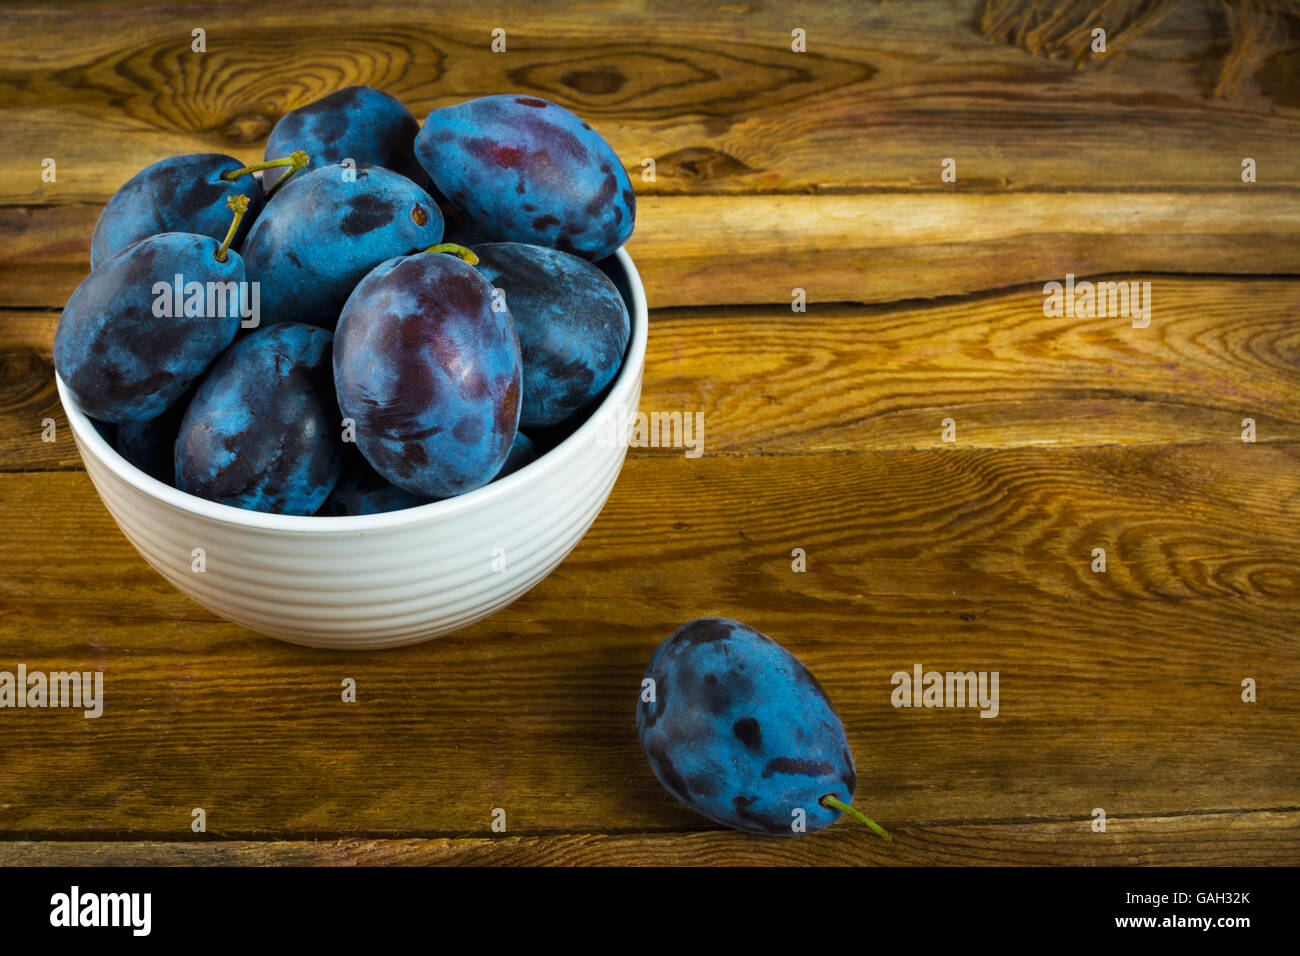 Fruit plum prunes in a white cup on a wooden table. Selective focus Stock Photo